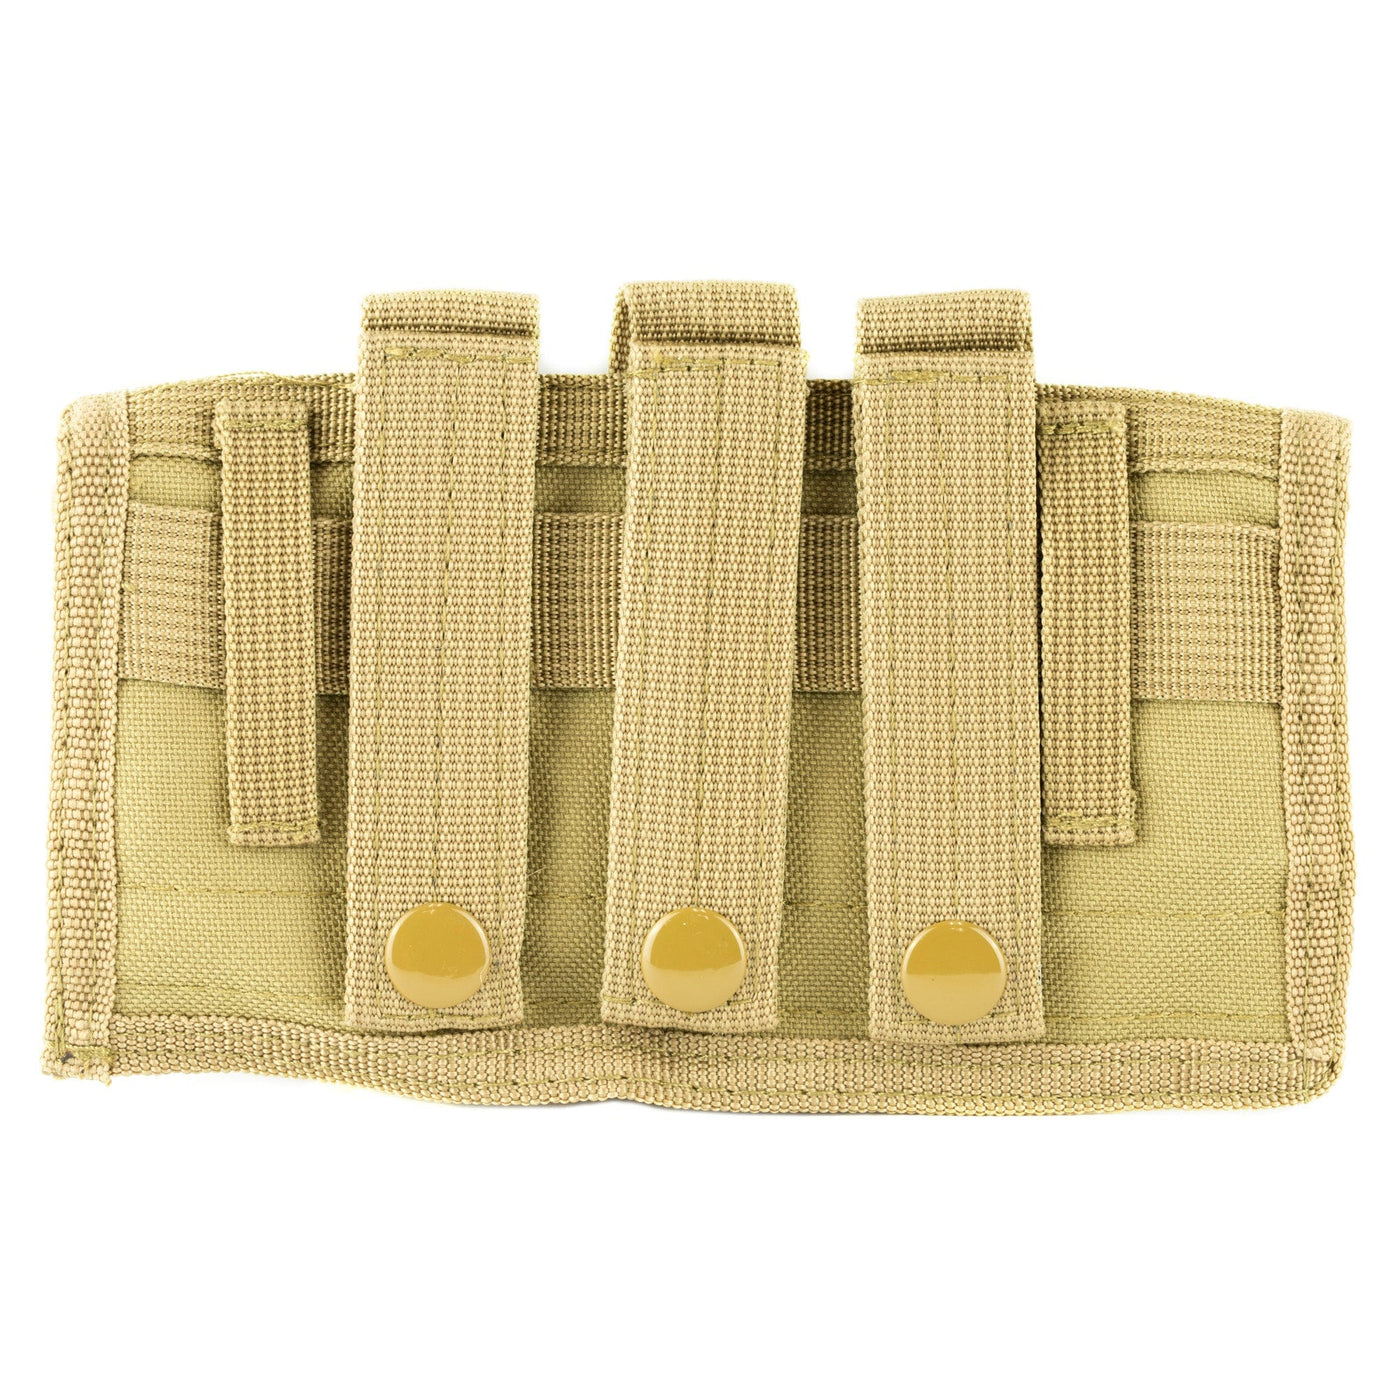 NCSTAR Ncstar Vism Tact Shell Carrier Tan Holsters